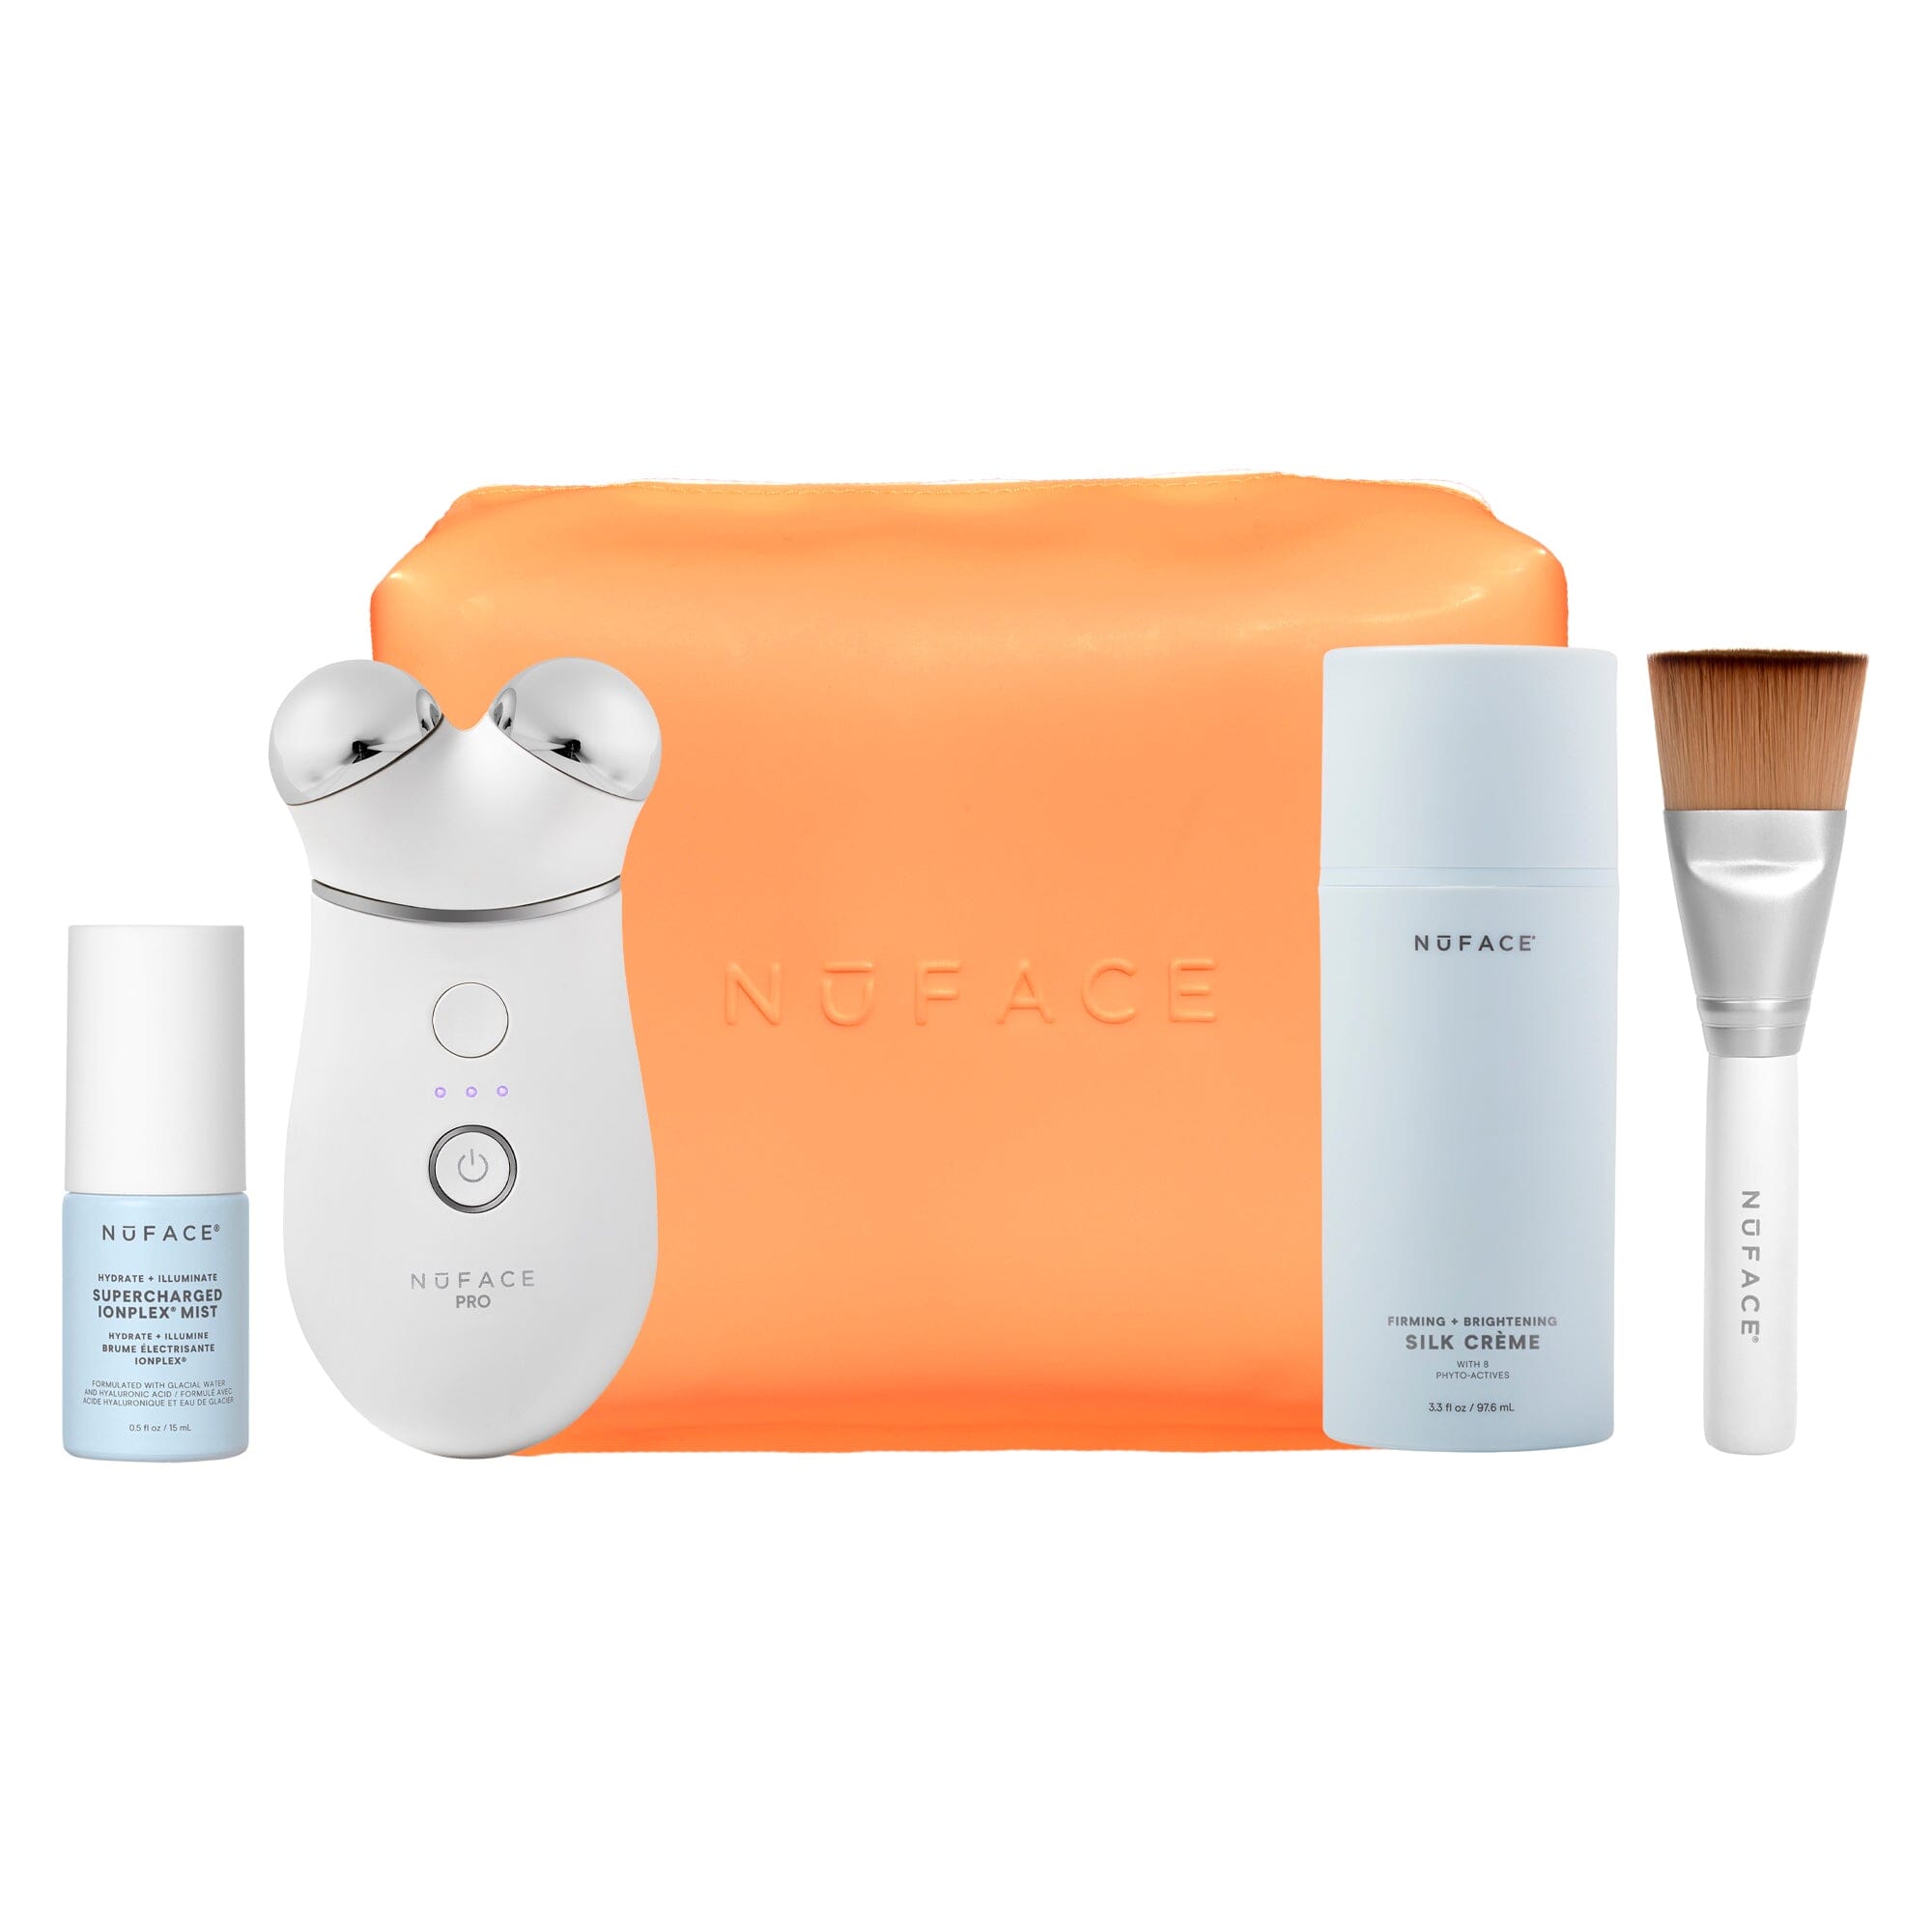 NuFACE Trinity+ PRO (up to 500 AMP) Limited Edition Spring Gift Set ($459 Value) NuFACE Shop at Exclusive Beauty Club